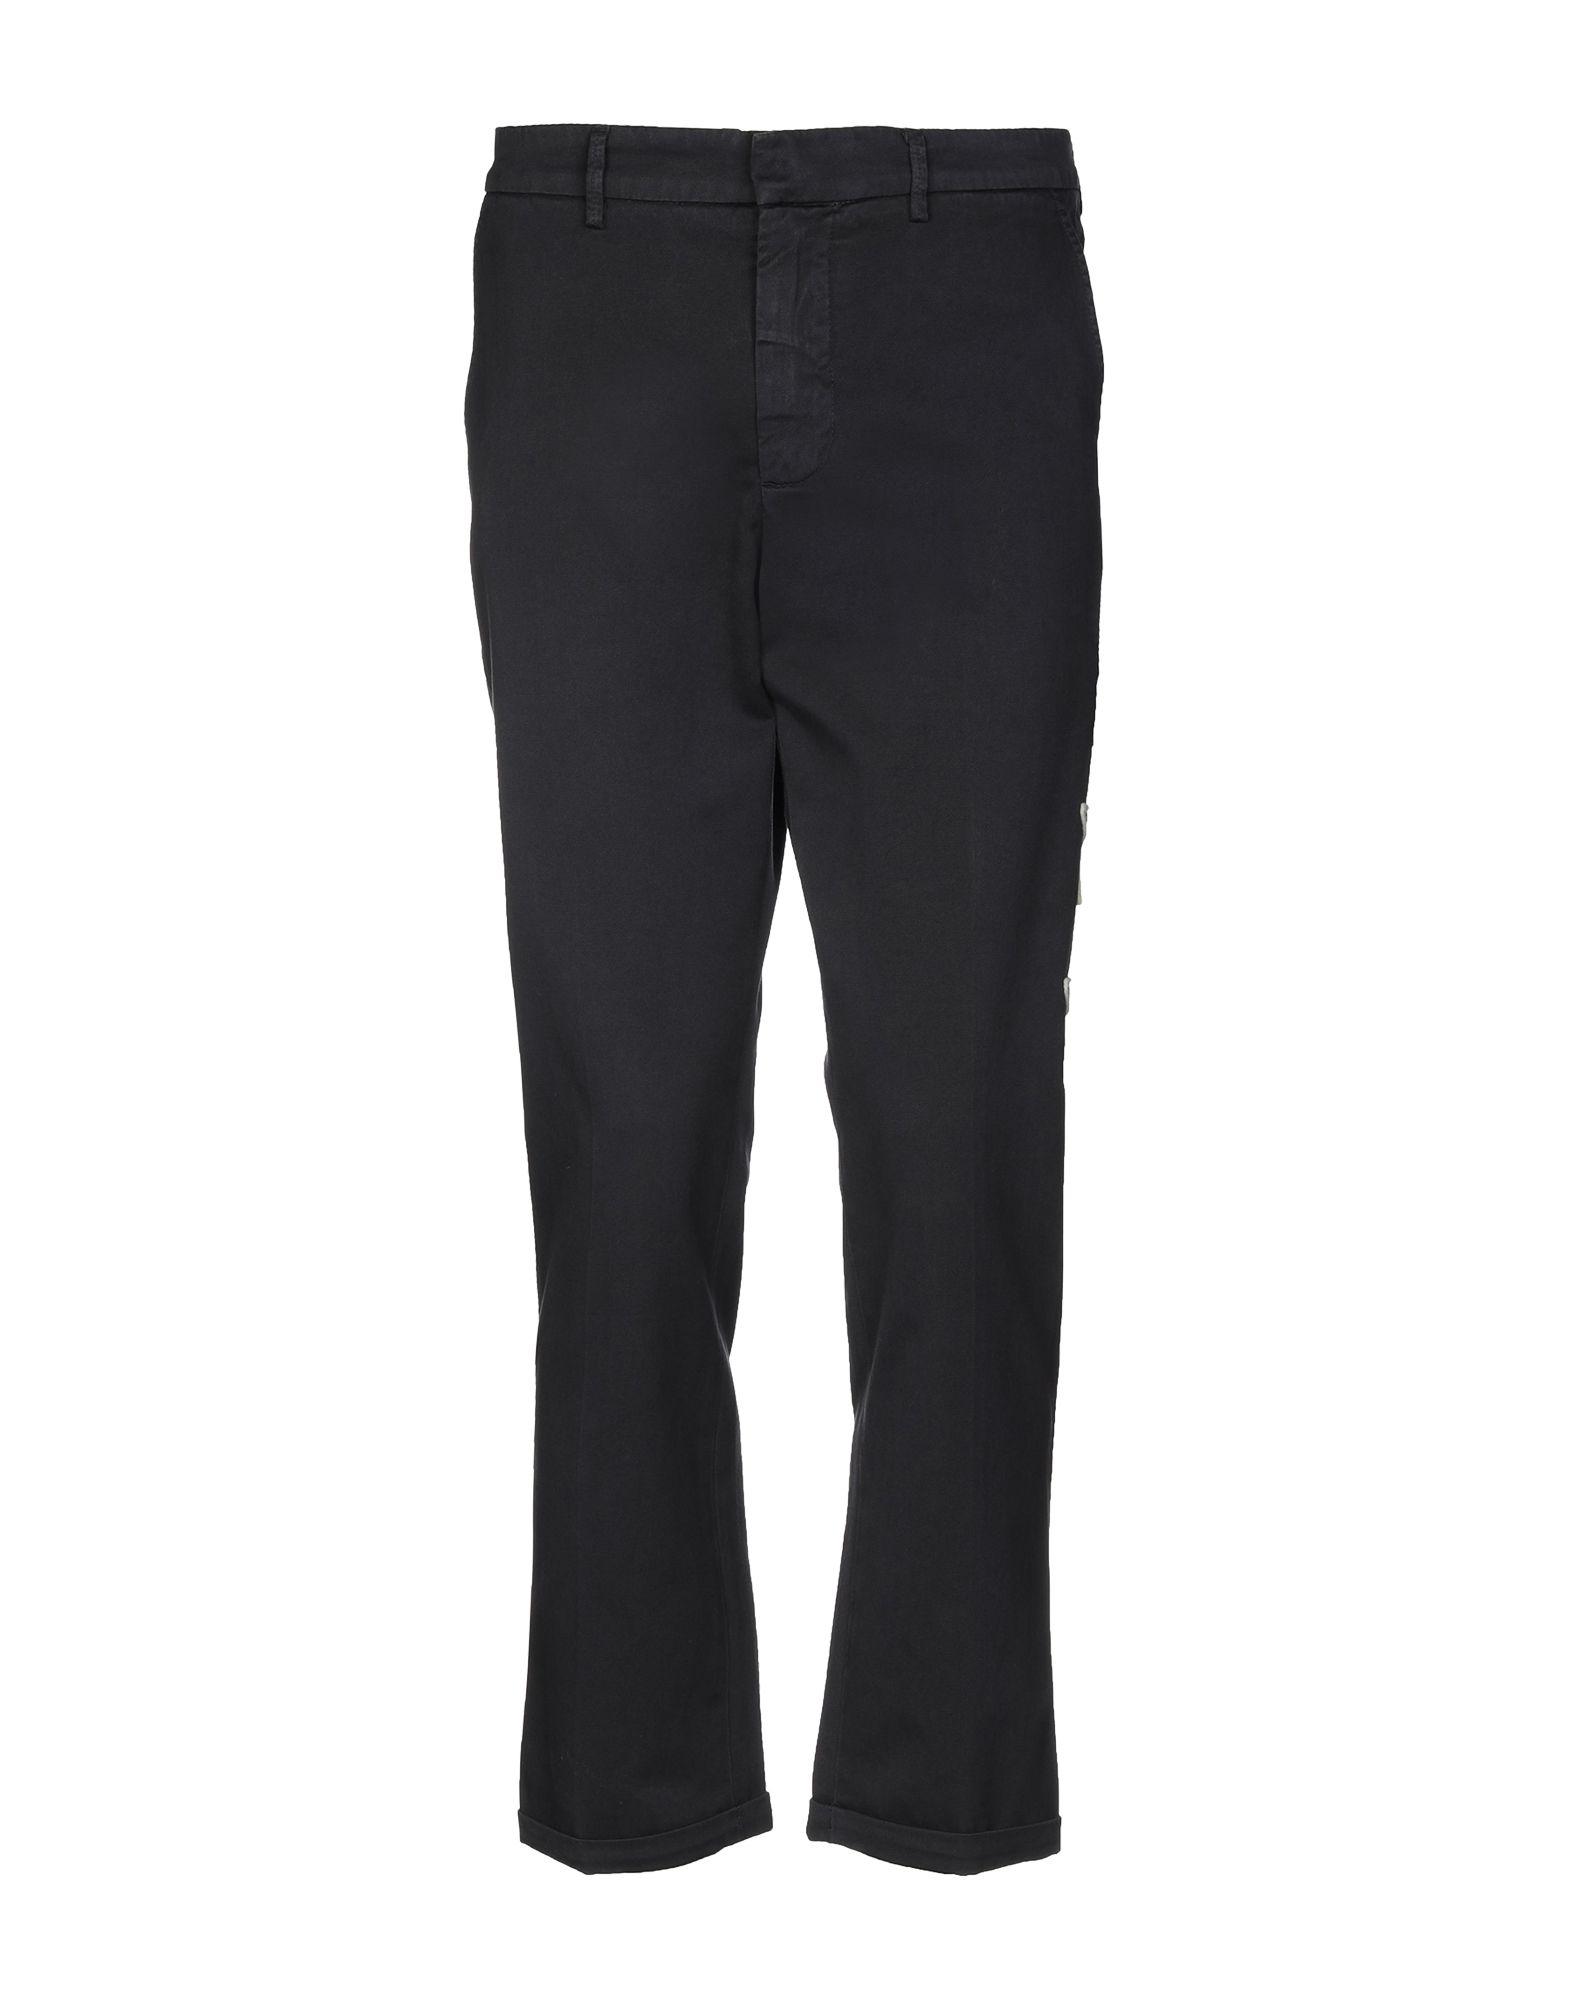 Lyst - Saucony Casual Pants for Men